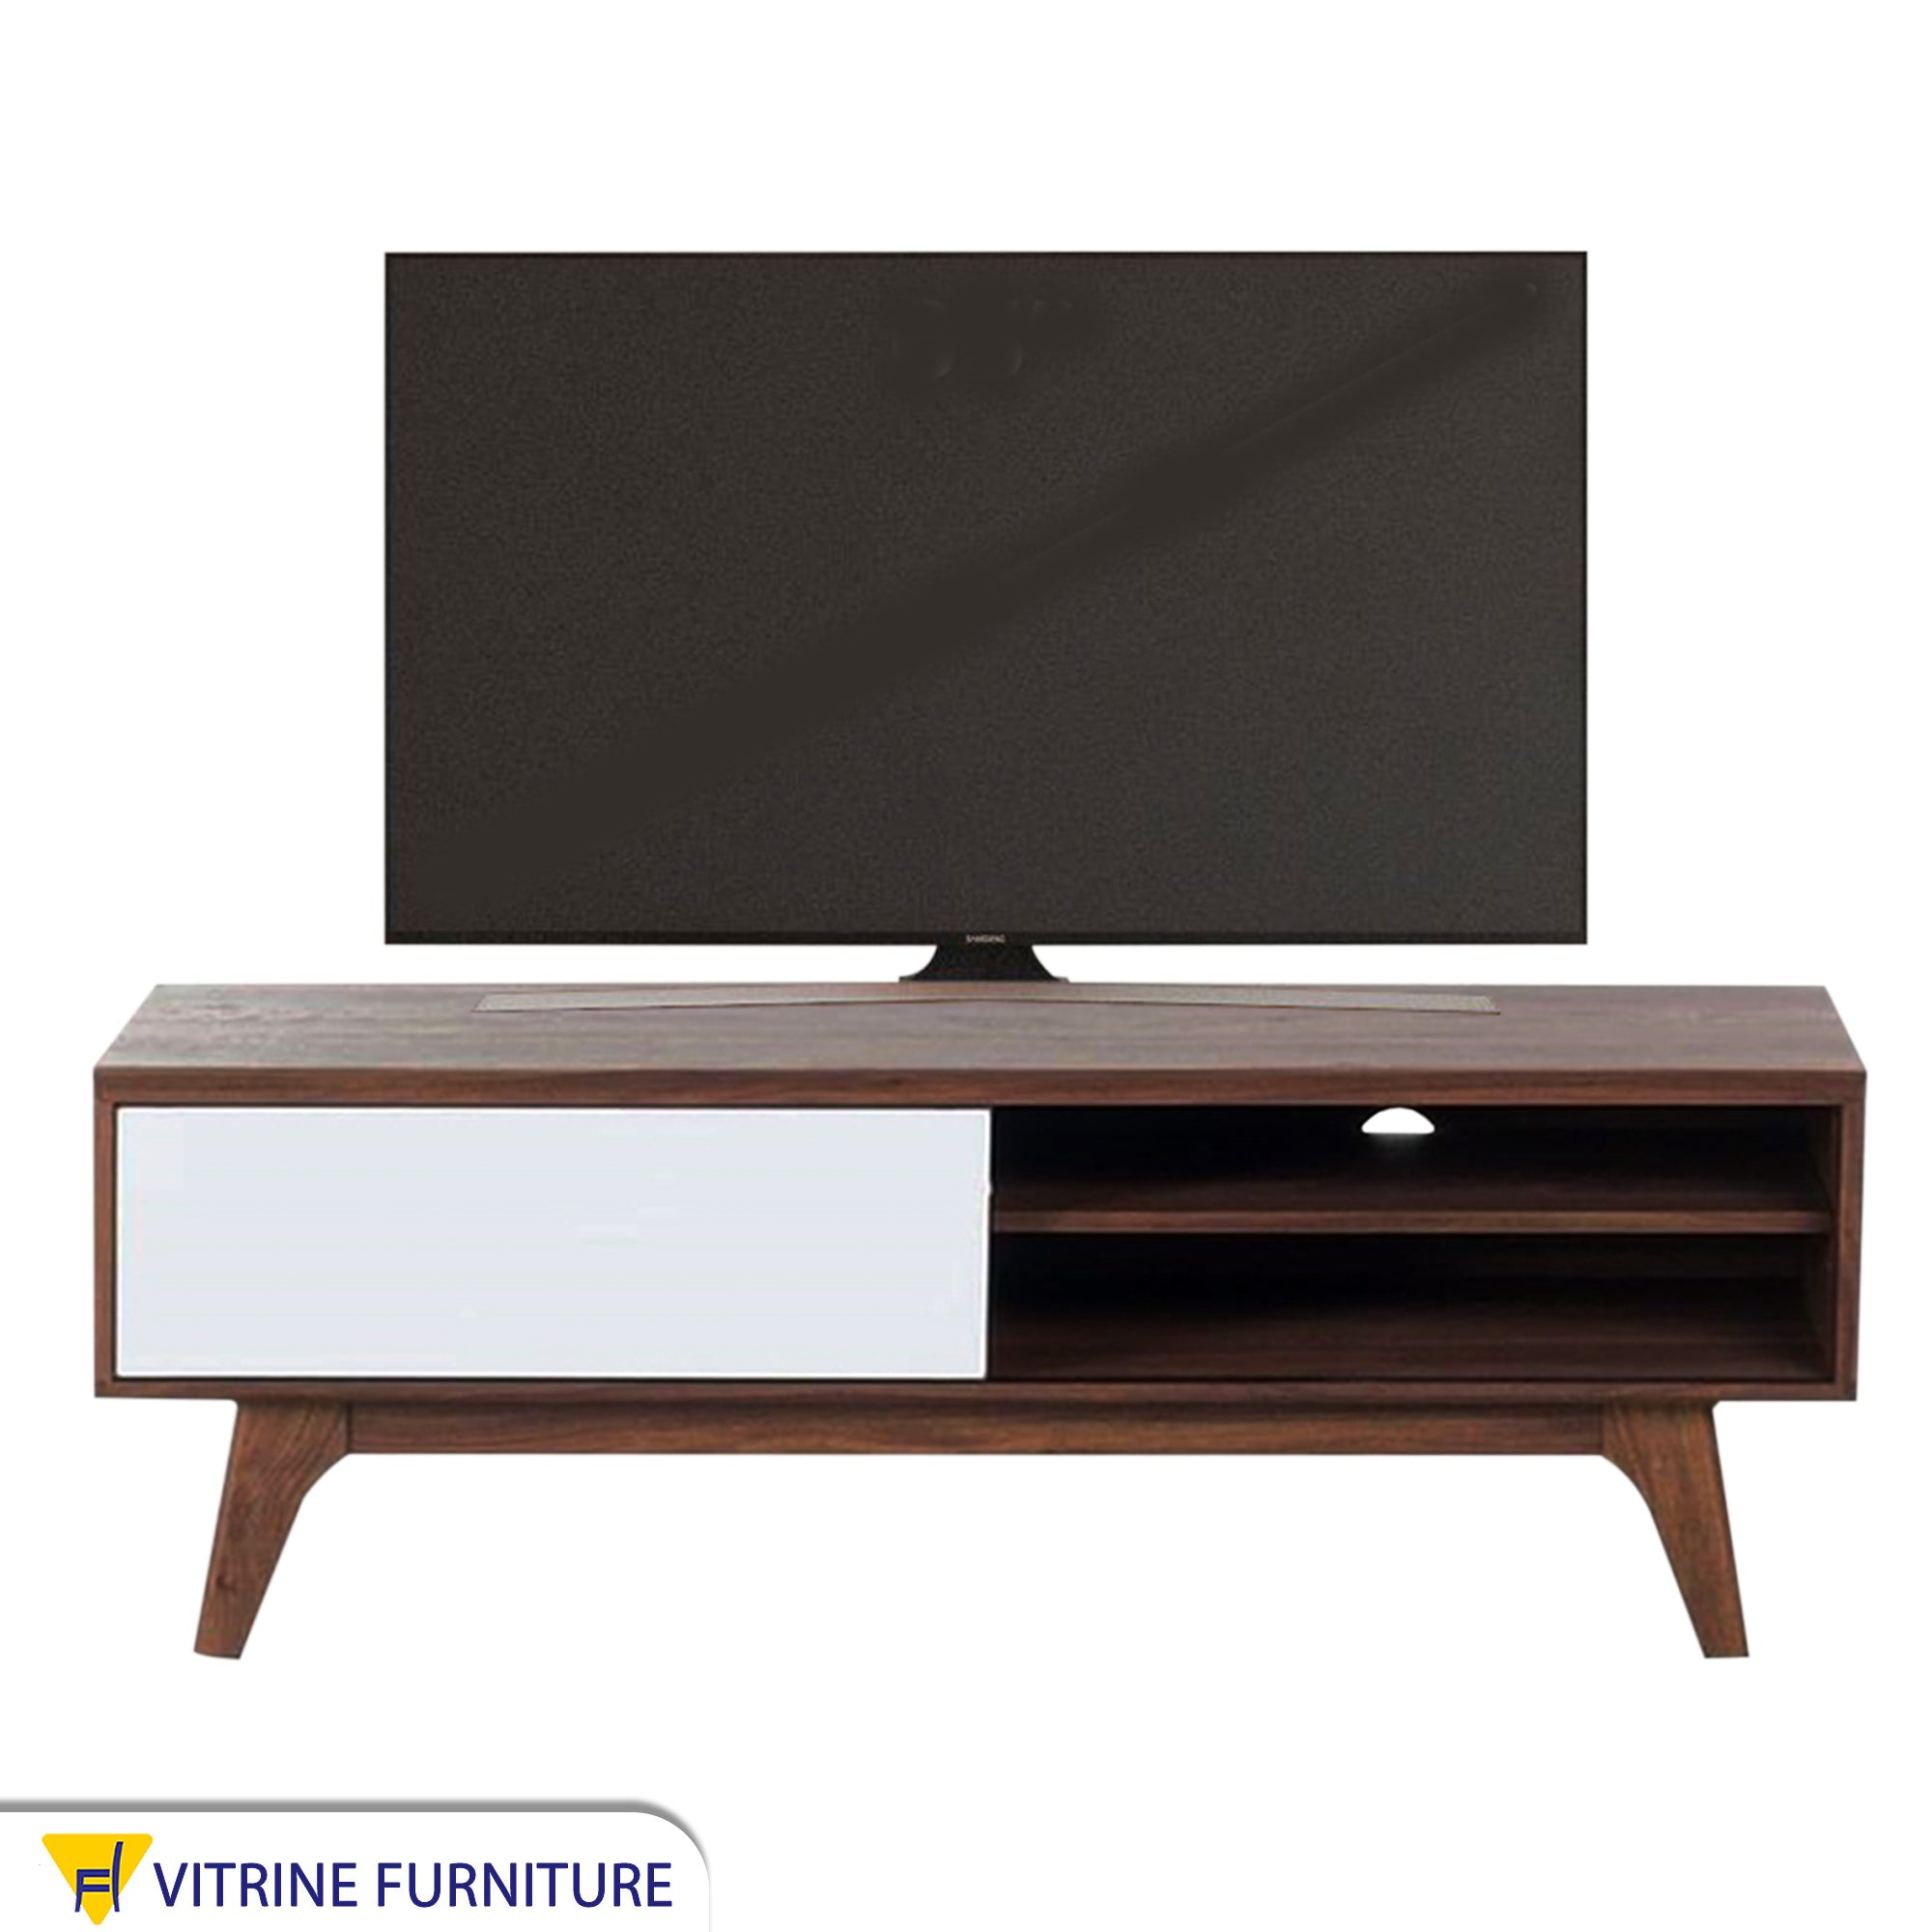 TV table in white and brown